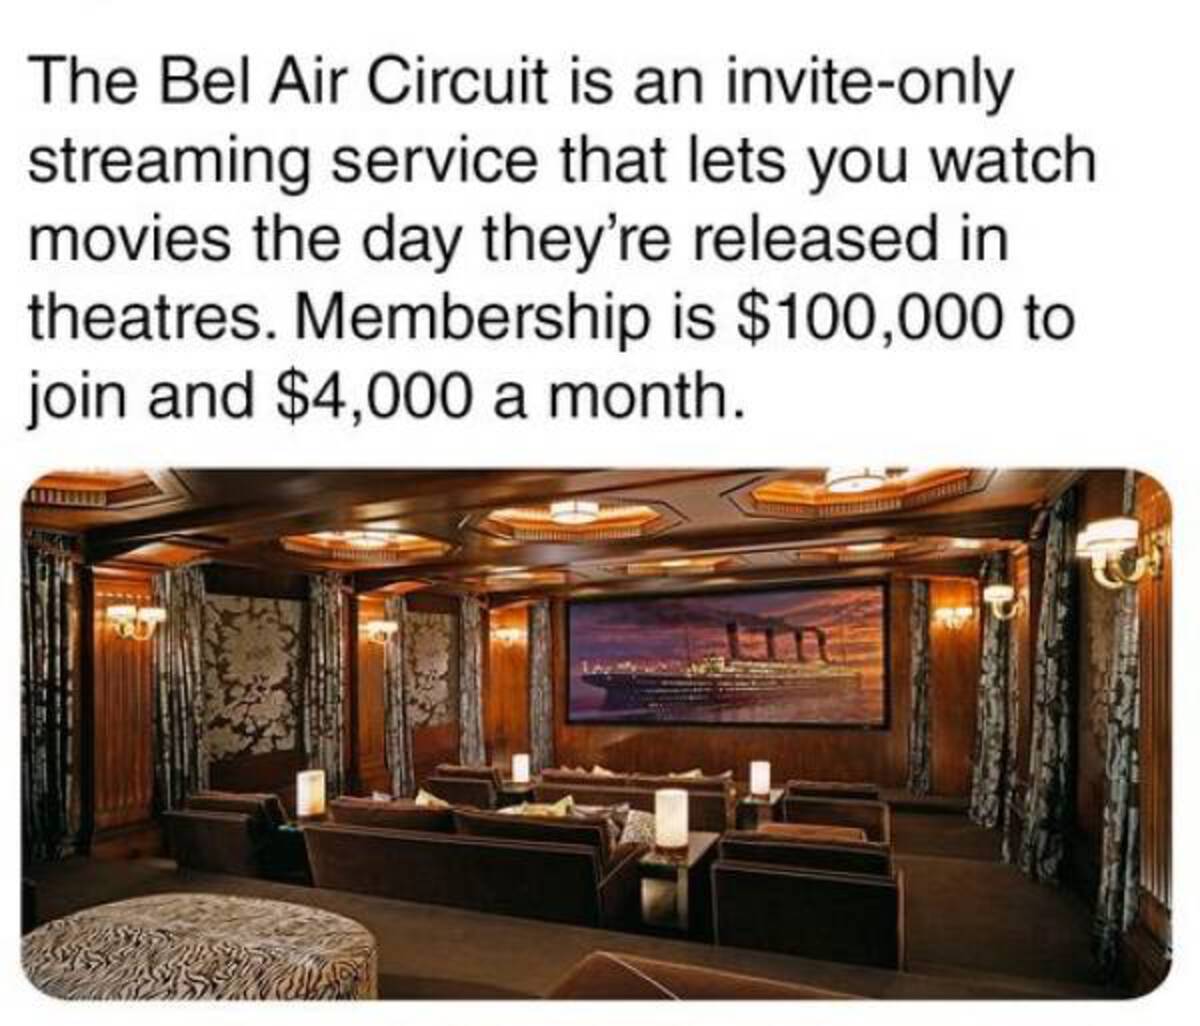 interior design - The Bel Air Circuit is an inviteonly streaming service that lets you watch movies the day they're released in theatres. Membership is $100,000 to join and $4,000 a month.